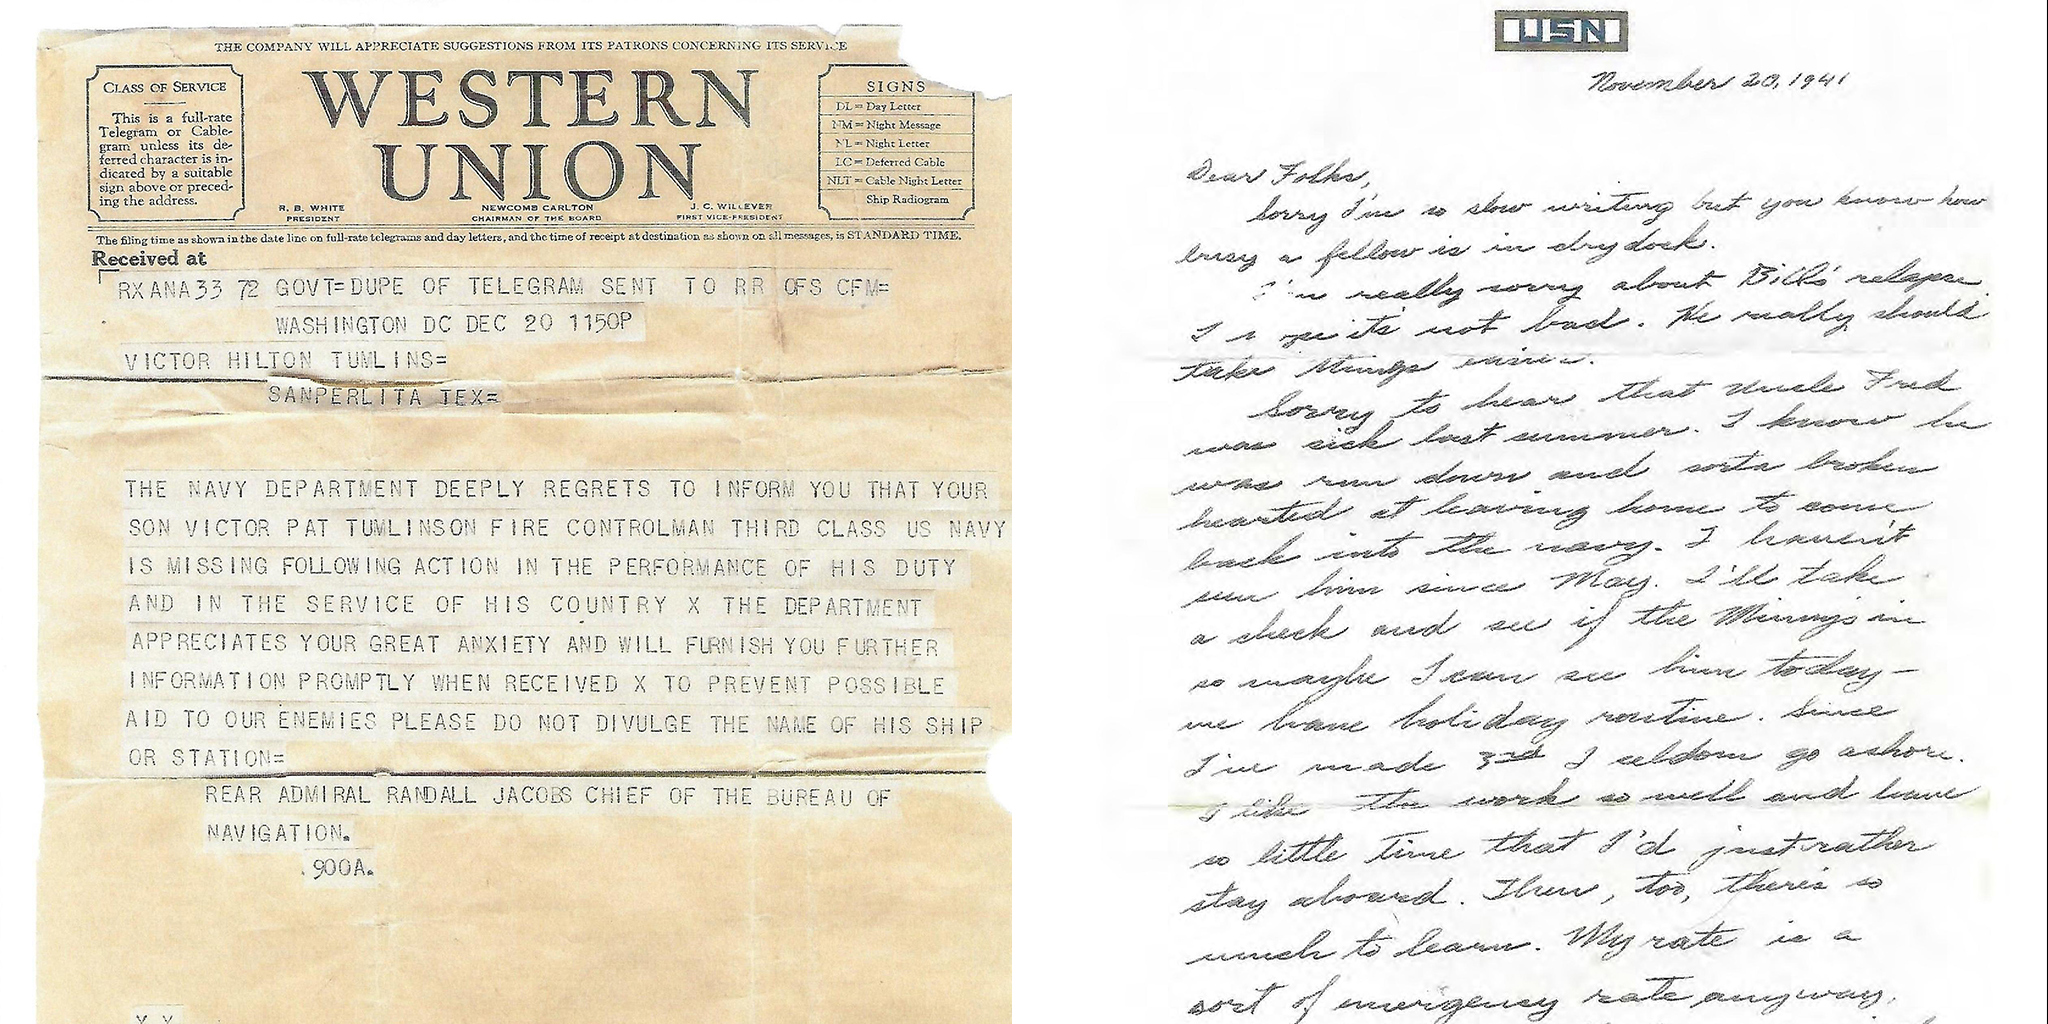 (L) A telegram from the U.S. Navy, dated Dec. 20, 1941, informed the Tumlinson family that Victor 